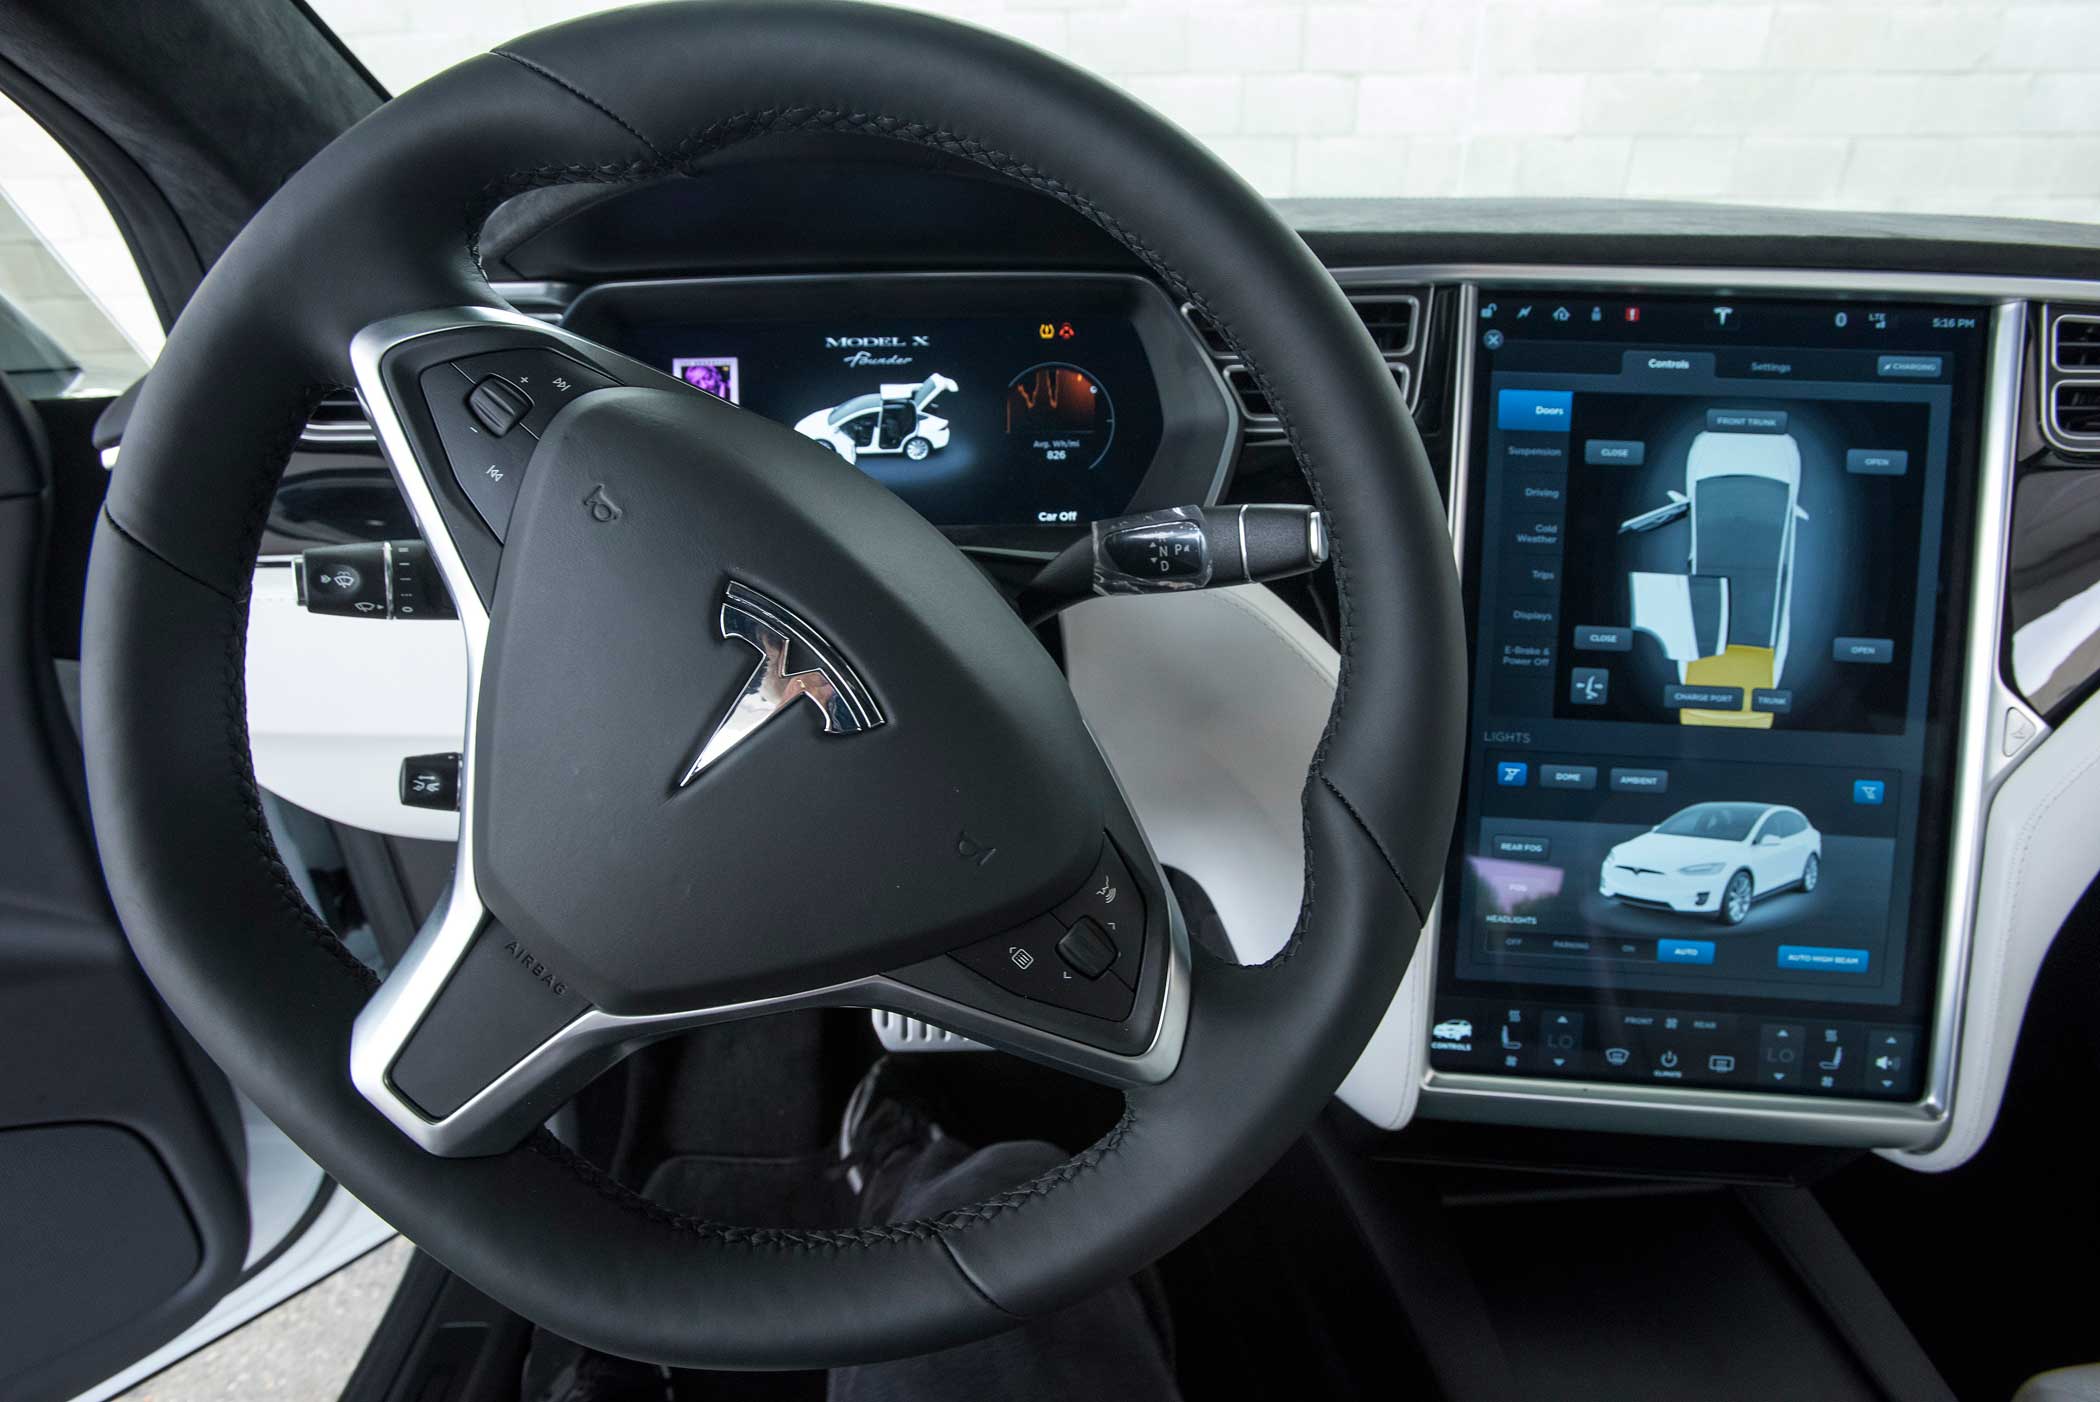 Most Model X settings are changed via touchscreen controls. An optional 'bioweapon defense mode' activates a hospital-grade filtration system.